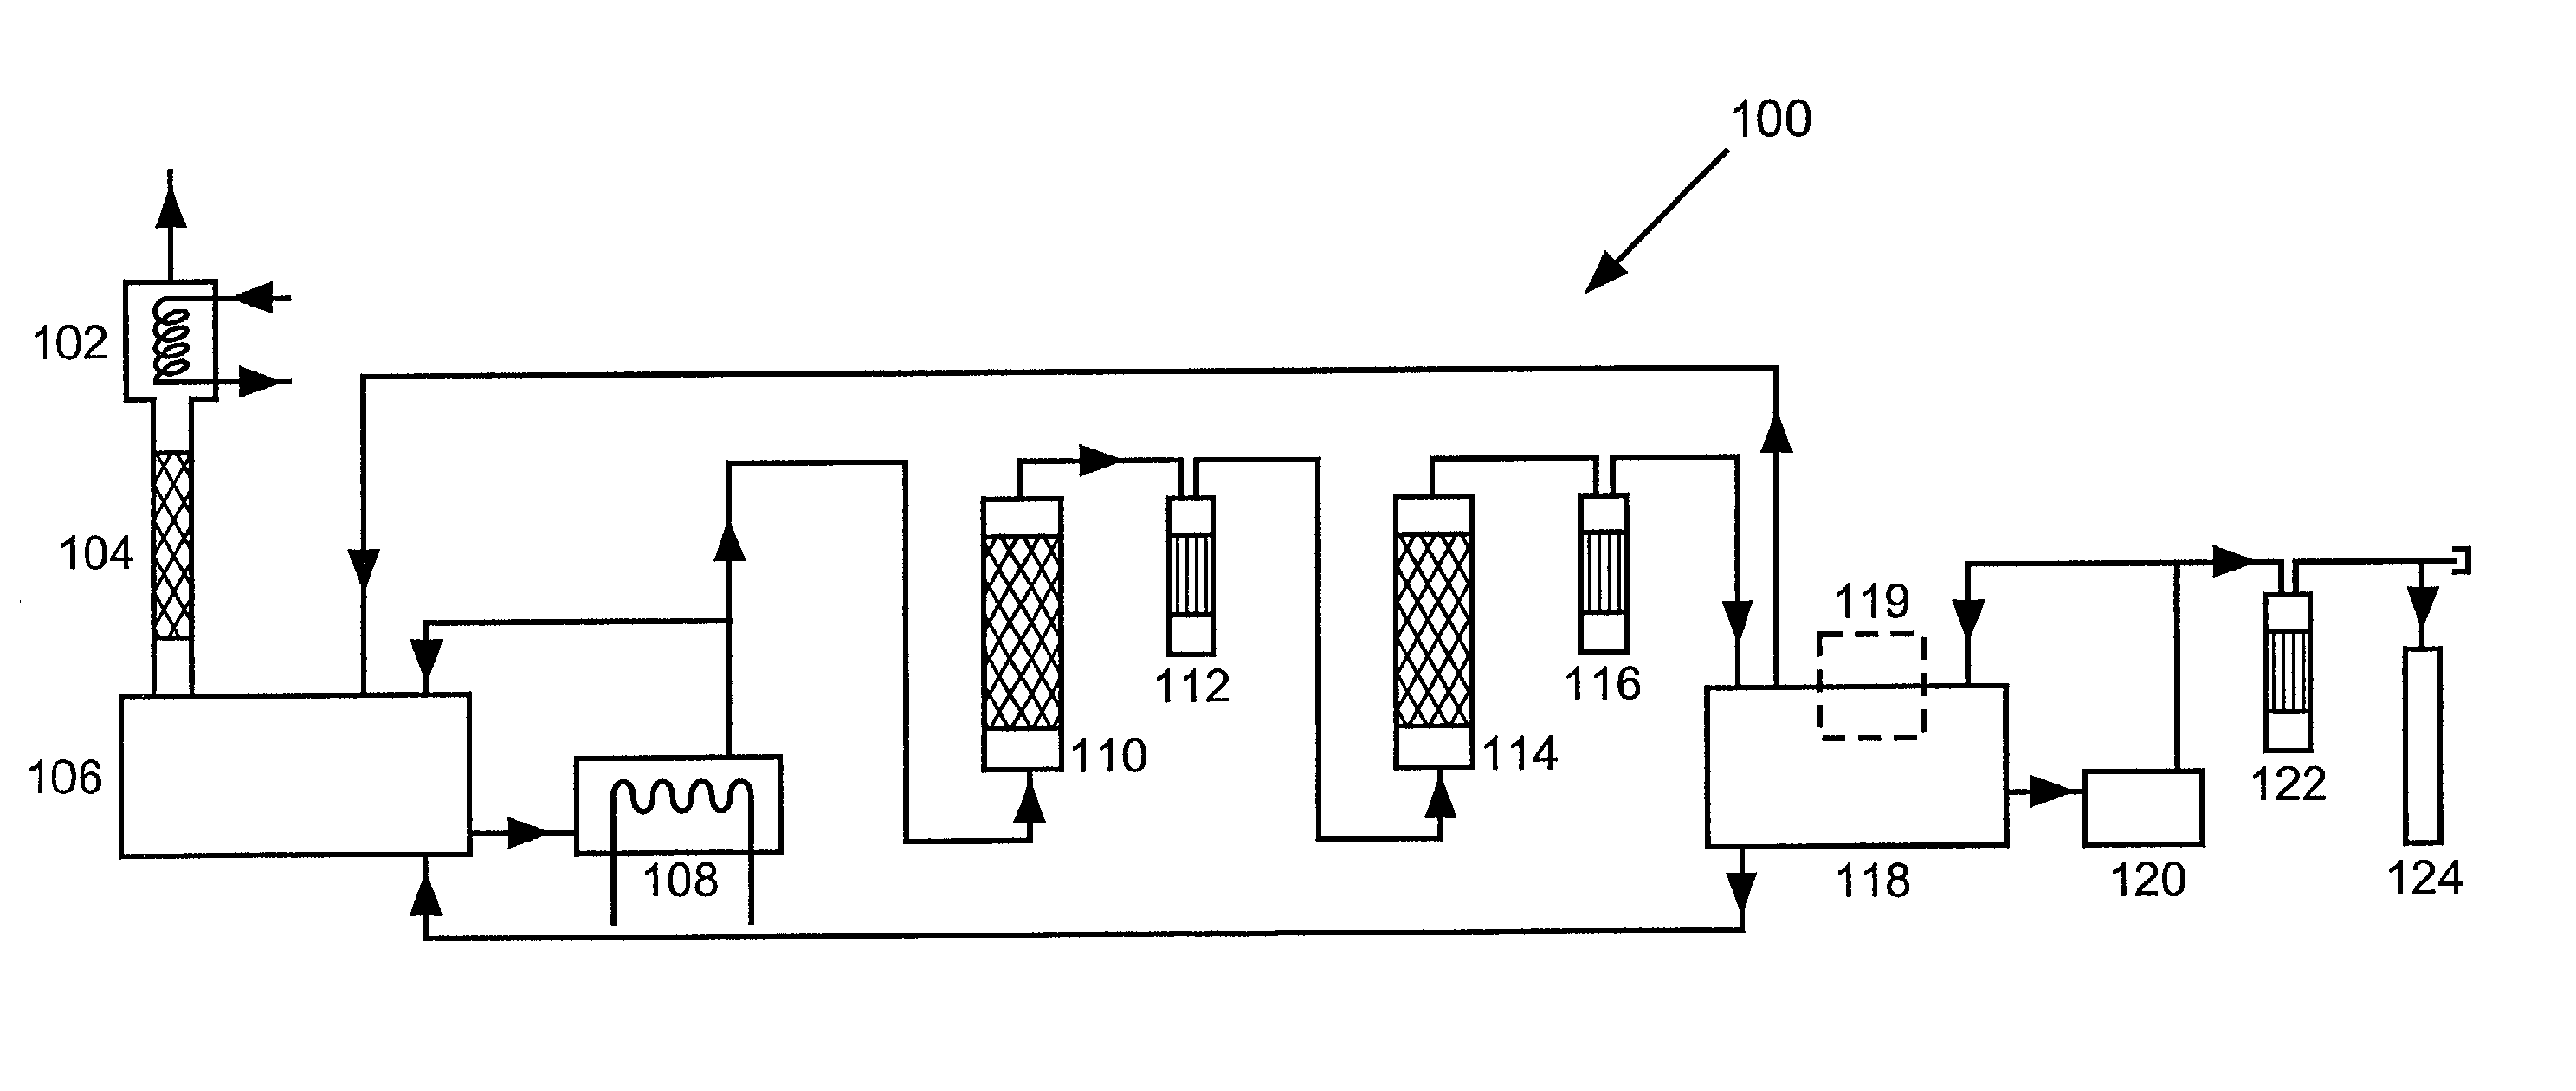 Nitrous oxide purification system and process